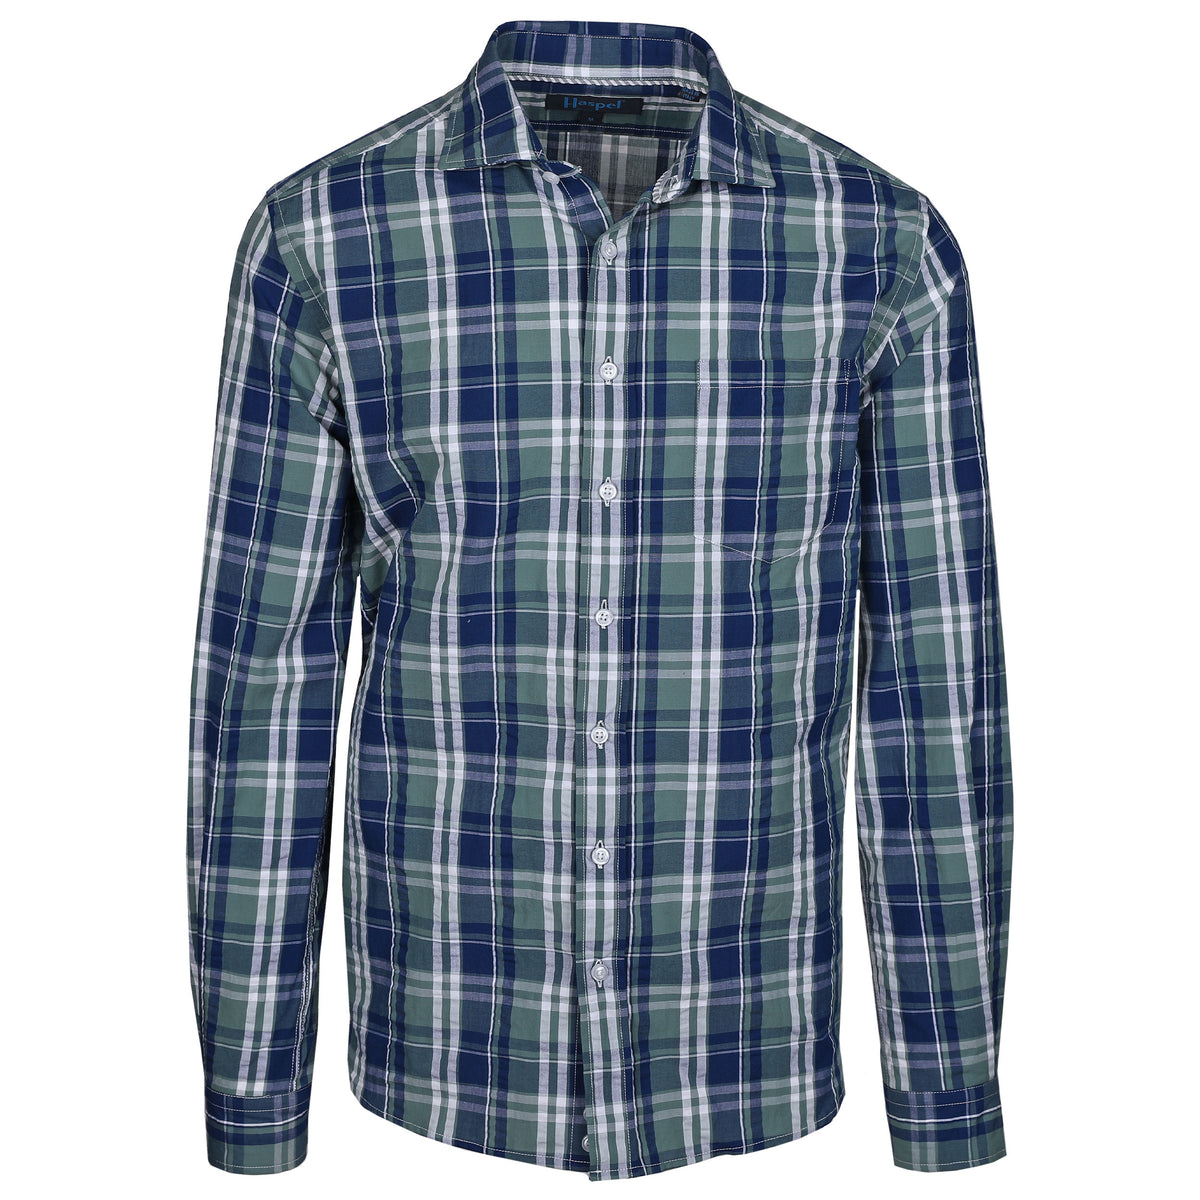 Channel the colors of the sea in a decidedly chic way with our Chartres Blue &amp; Green Seersucker fabric. This lightweight plaid is sure to give your wardrobe a splash of color as cool as a sea breeze.  100% Cotton • Spread Collar with Removable Collar Stays • Long Sleeve • Chest Pocket • Machine Washable • Made in Italy • Return Policy